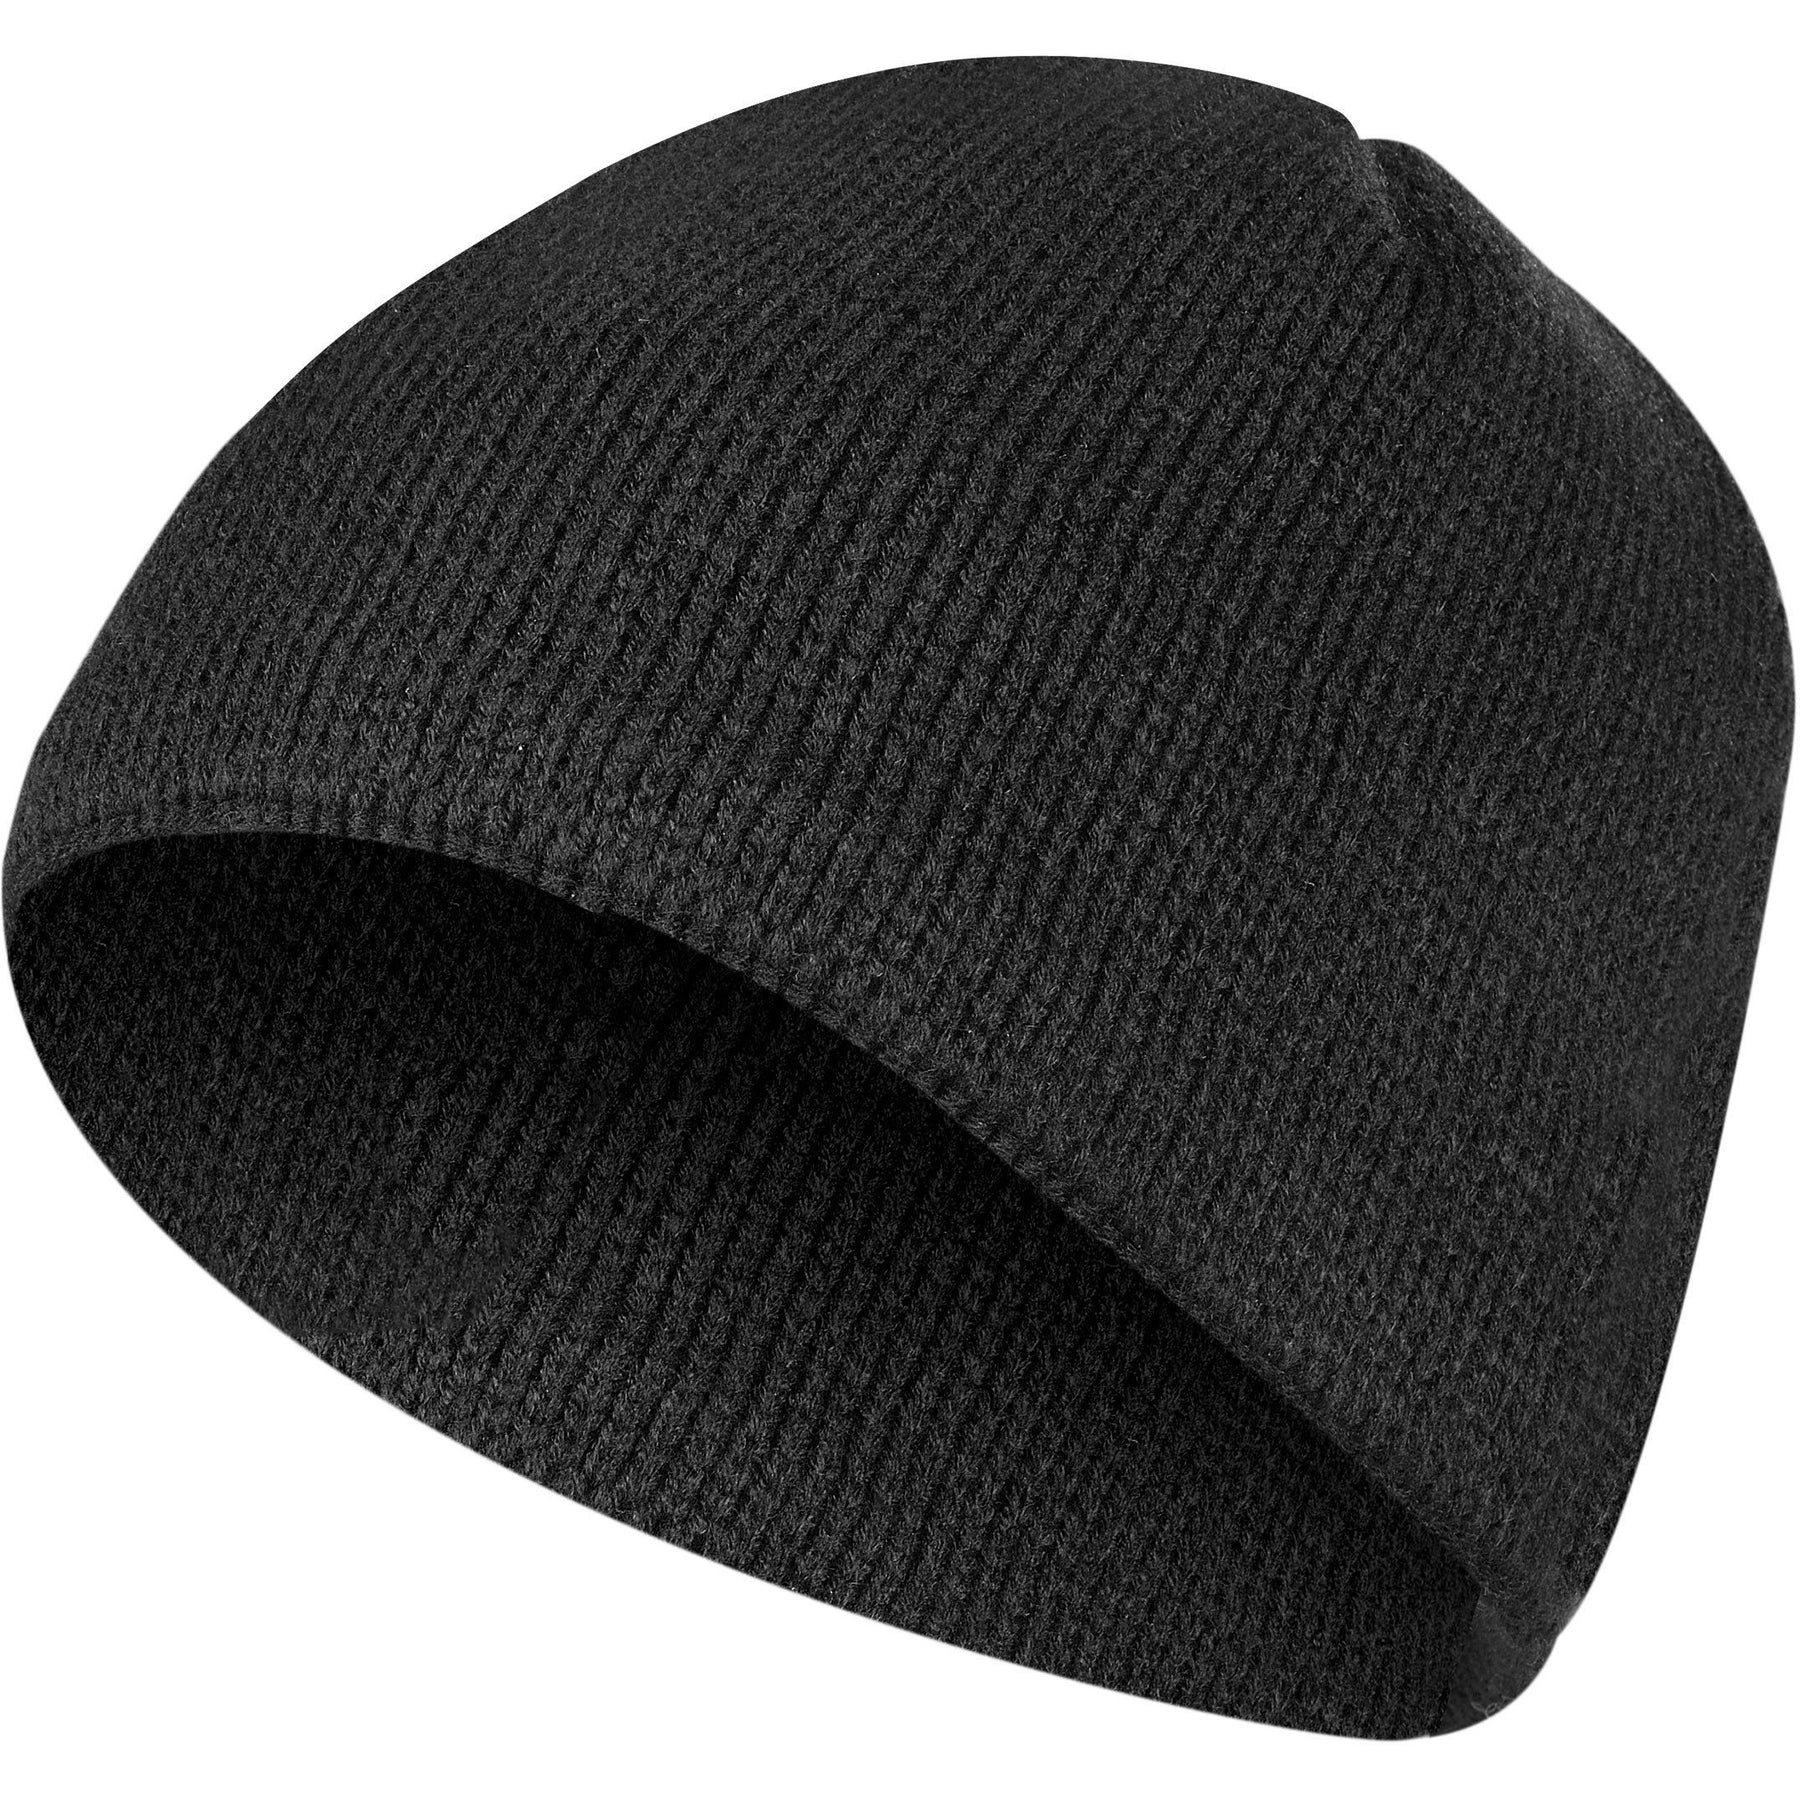 Winter Hat | Big & Tall | Men's Accessories | Large Lad Clothing